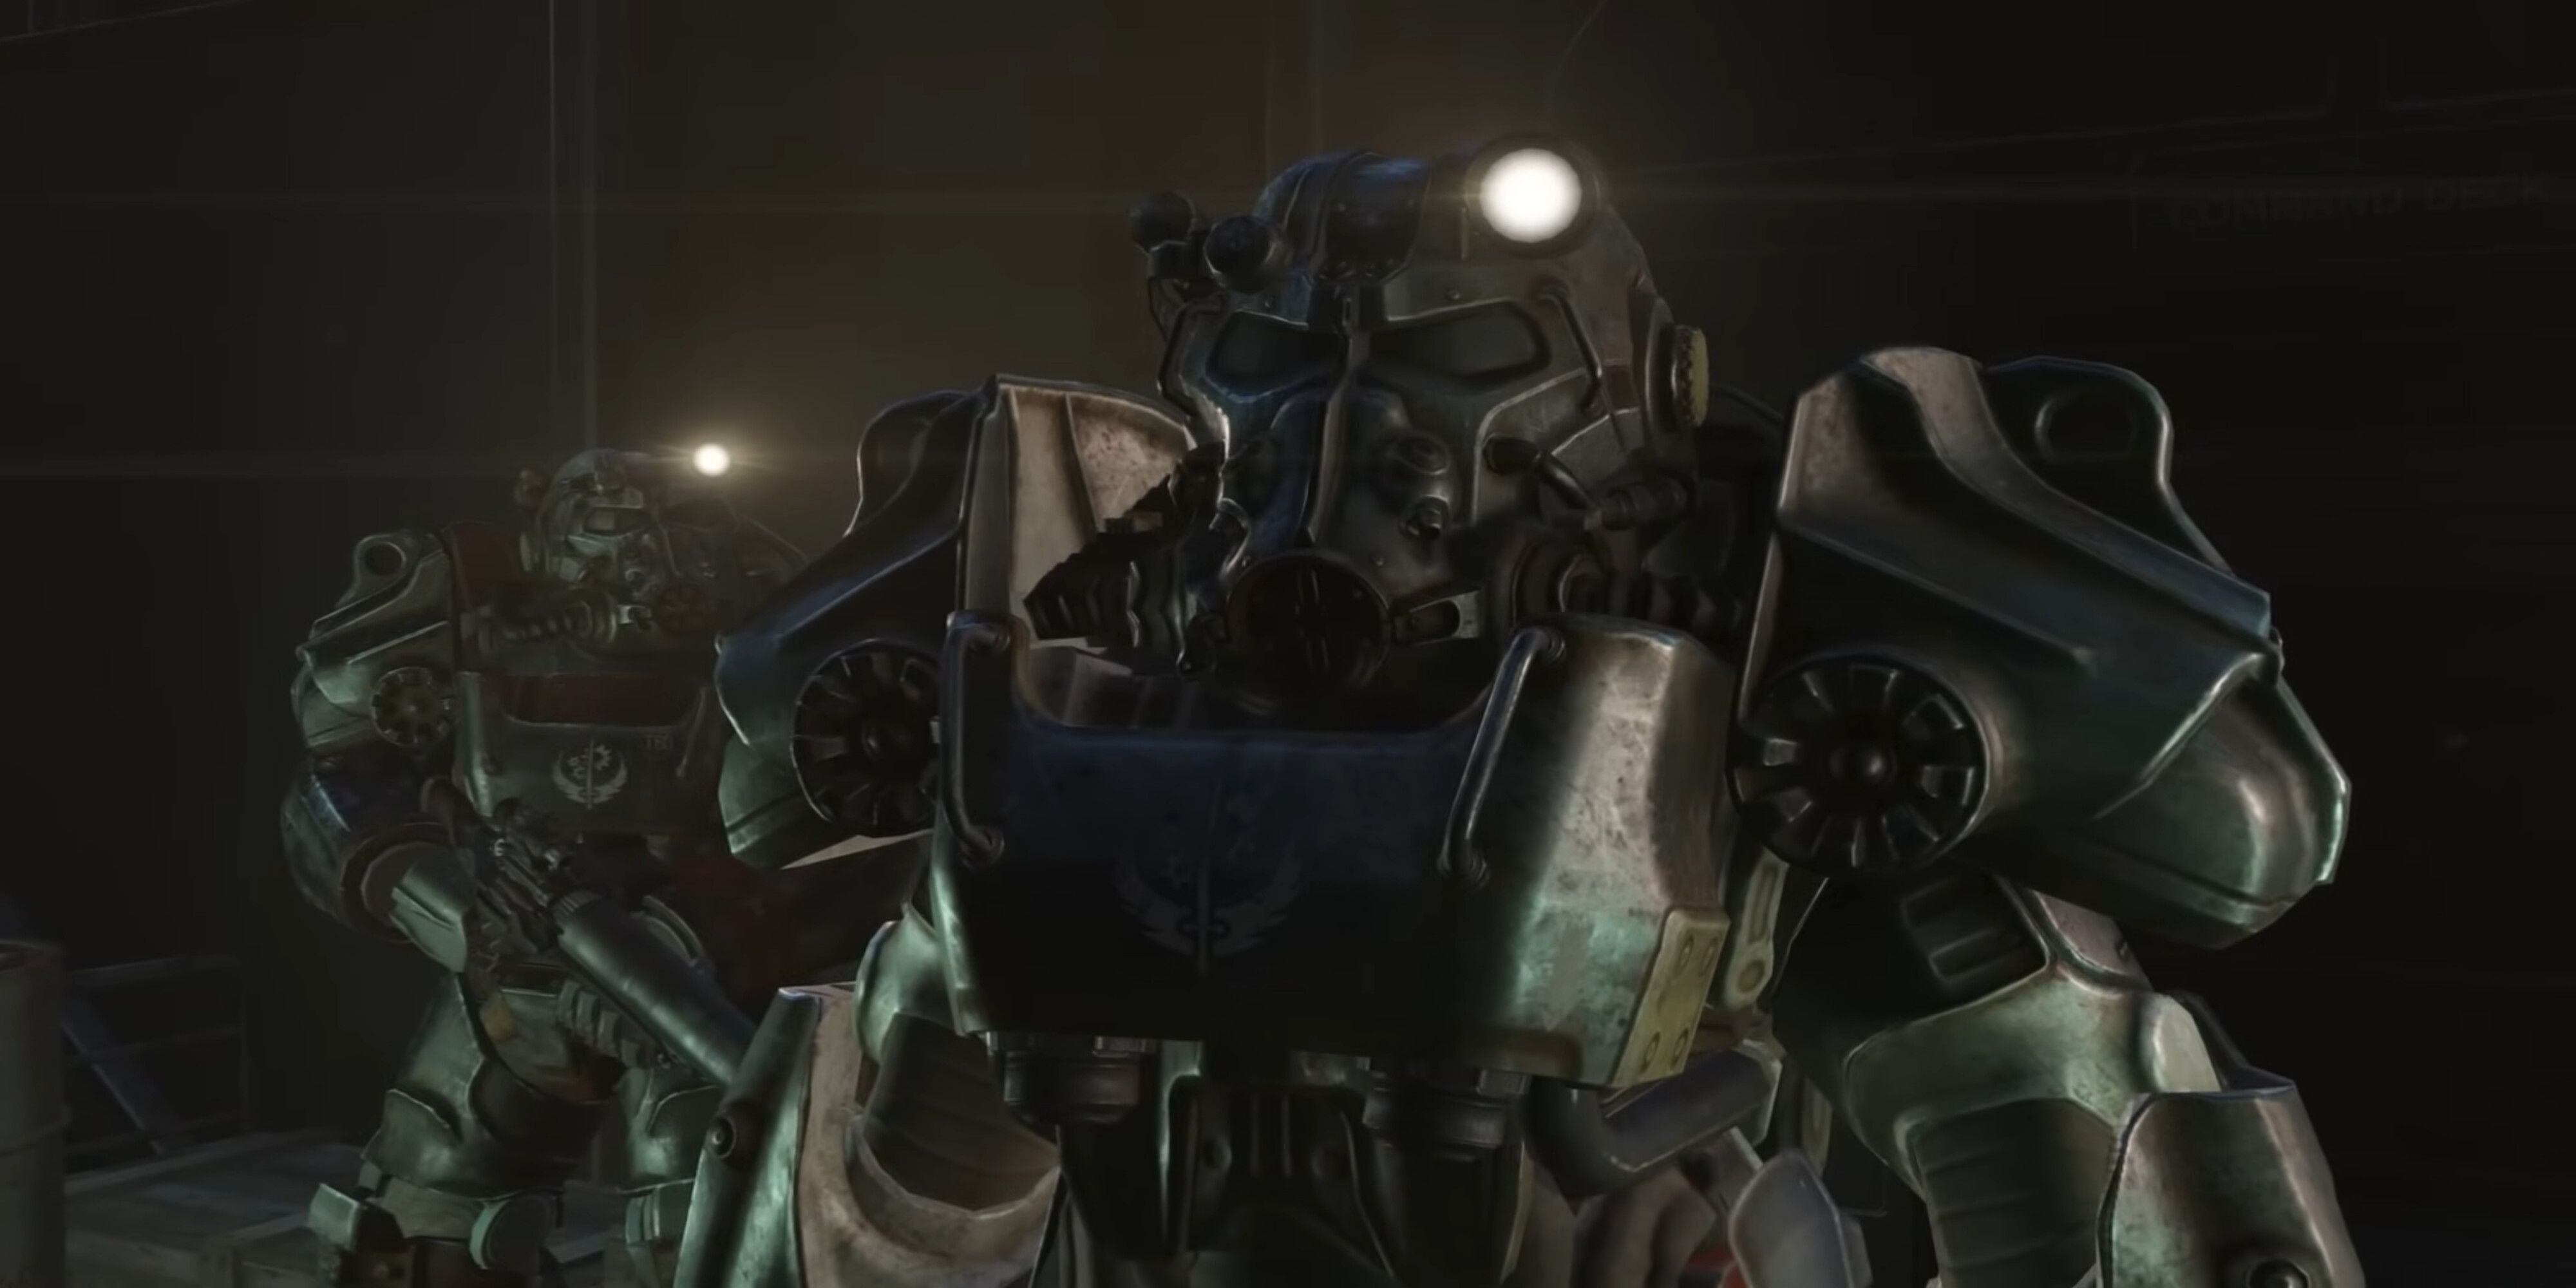 Power Armor Users From Fallout 4 Trailer